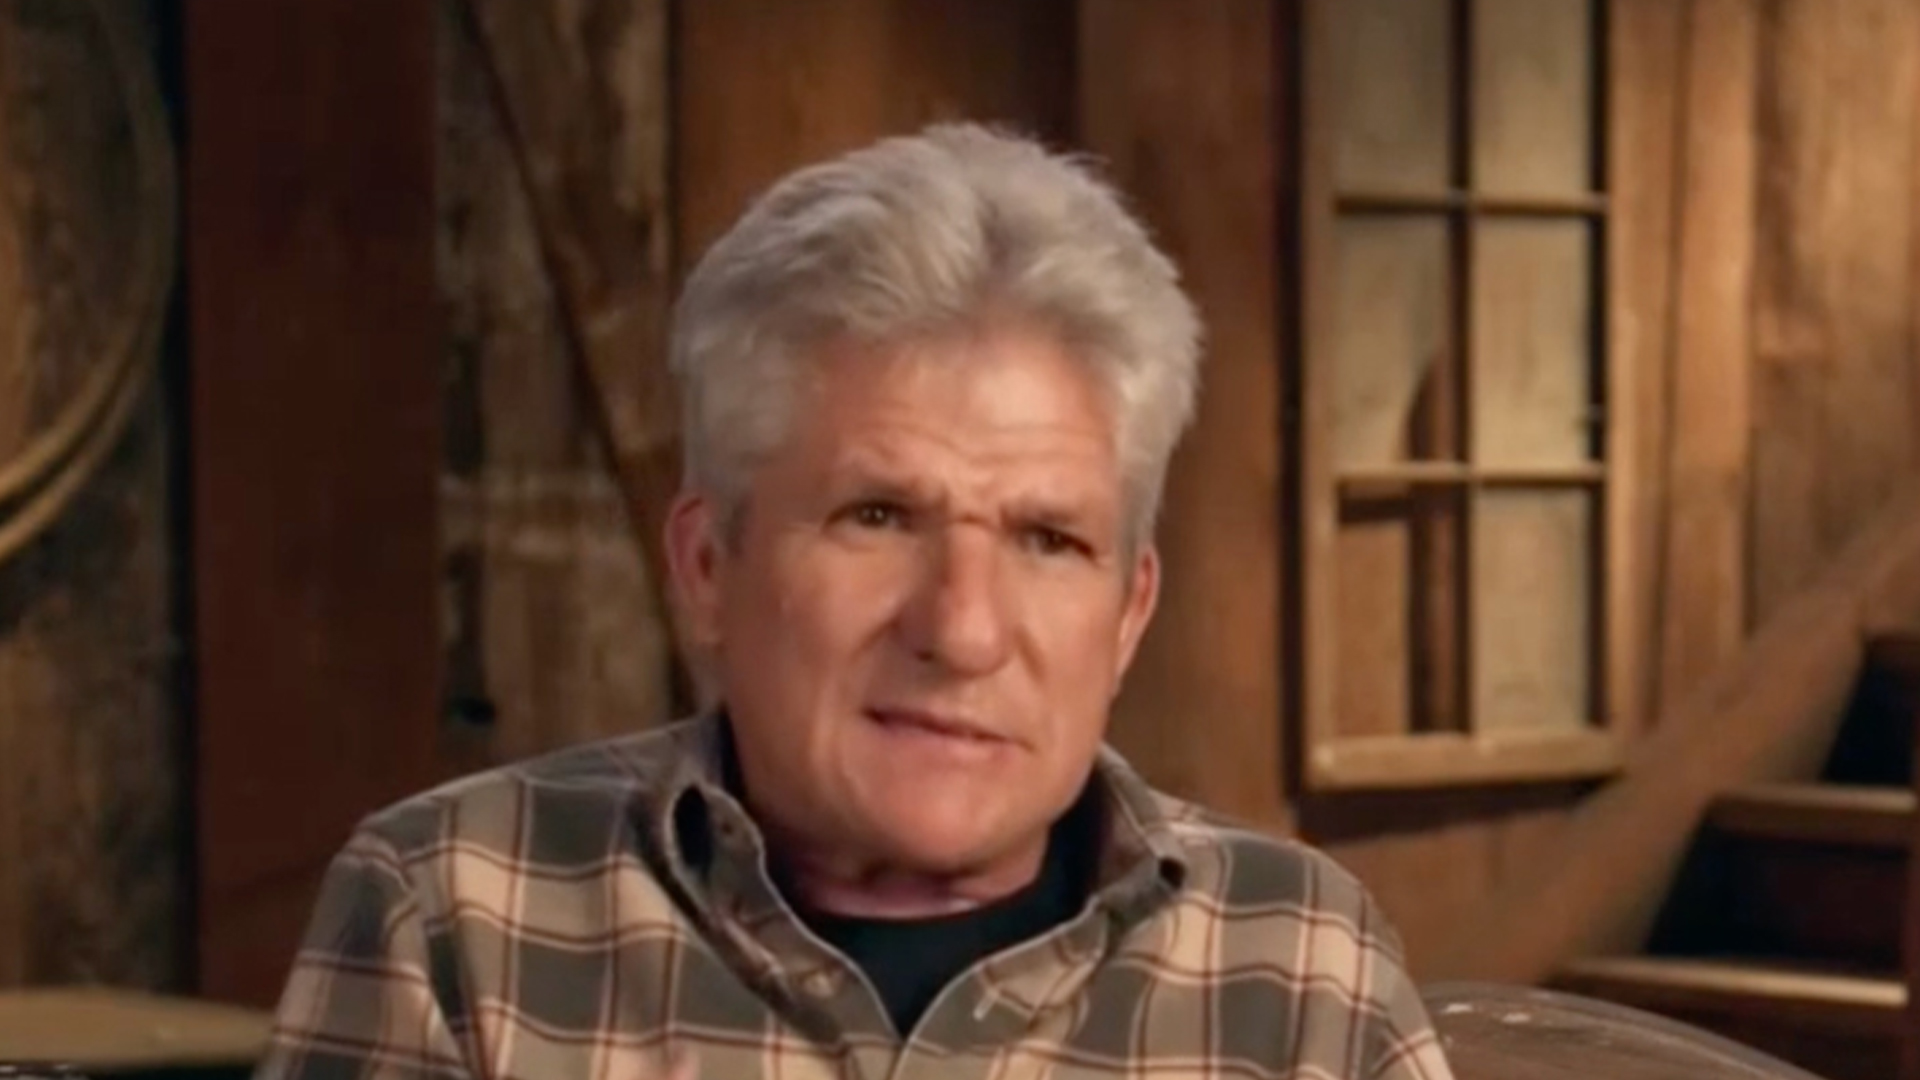   
																Little People’s Matt Roloff slams his own kids as ‘monsters’ in shocking new video amid nasty family feud over $4M farm 
															 